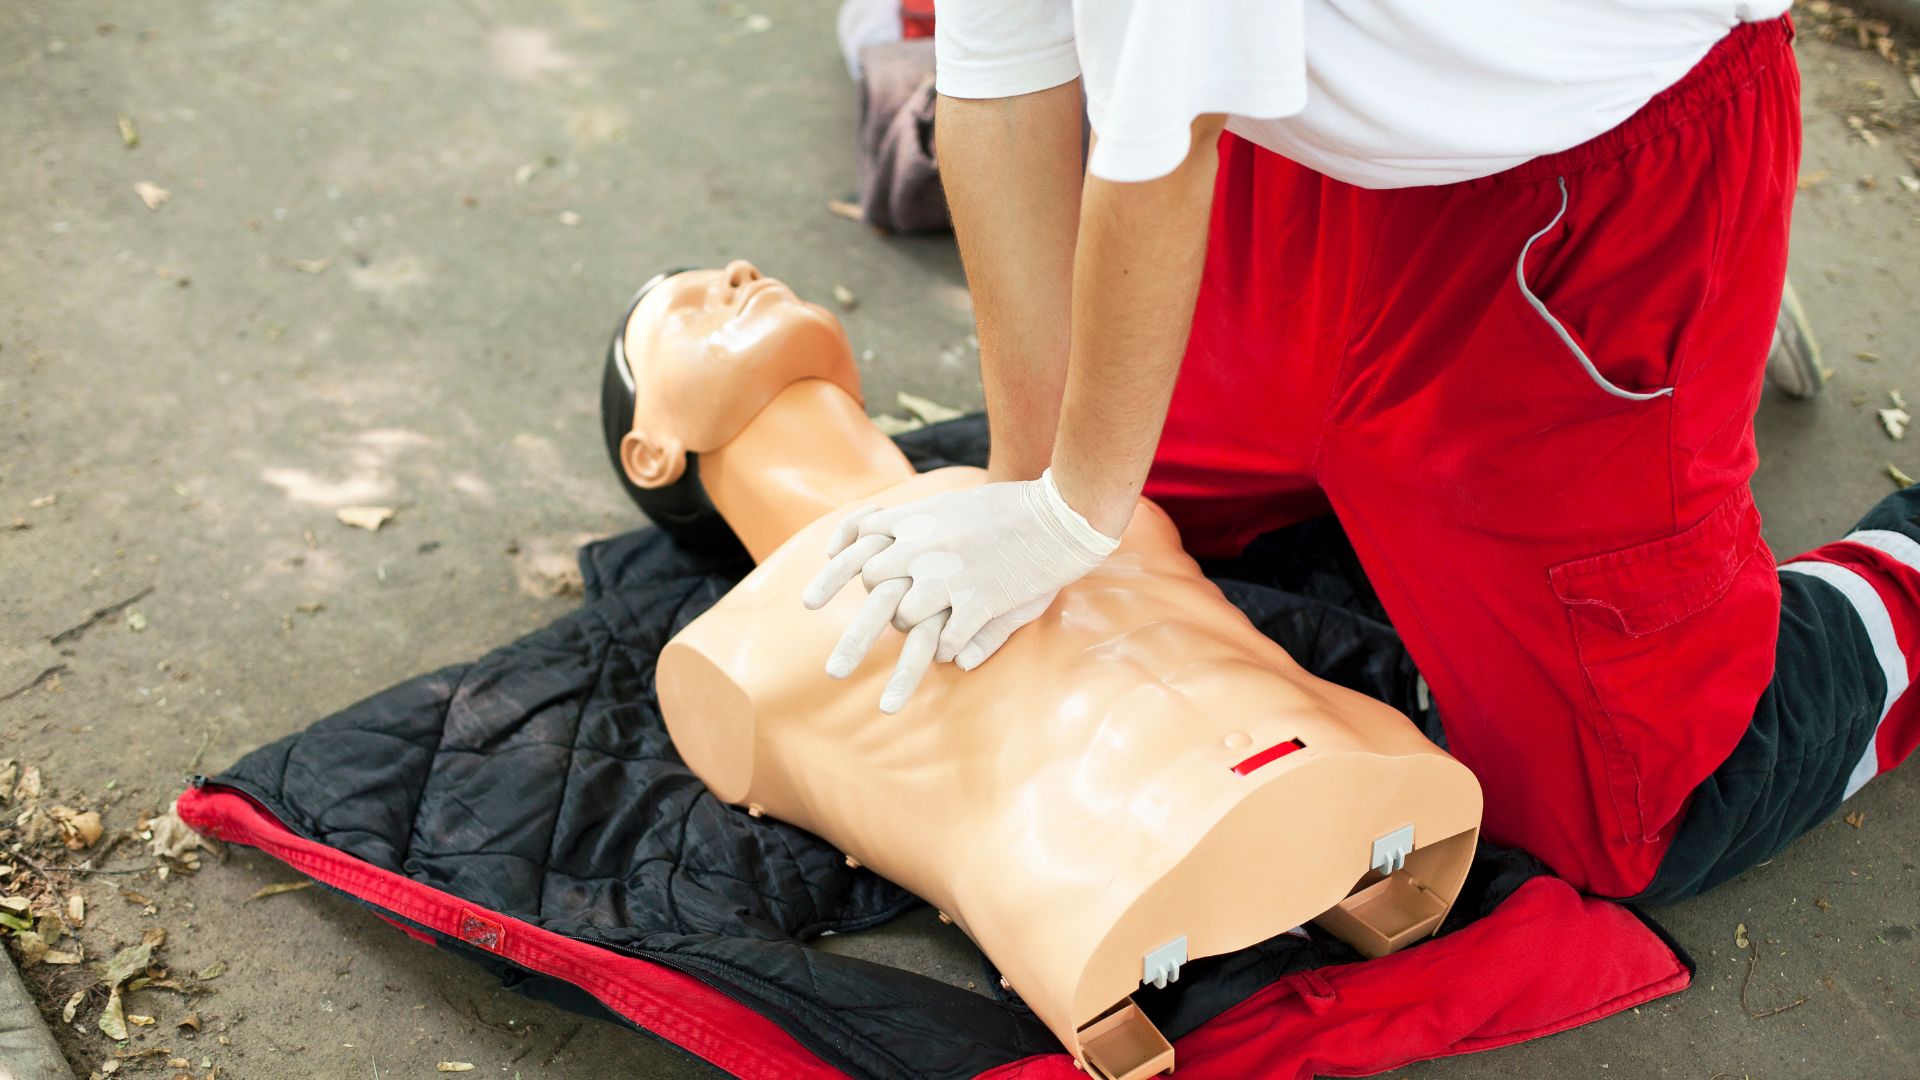 Adult CPR Certification: When and Why It Is Needed